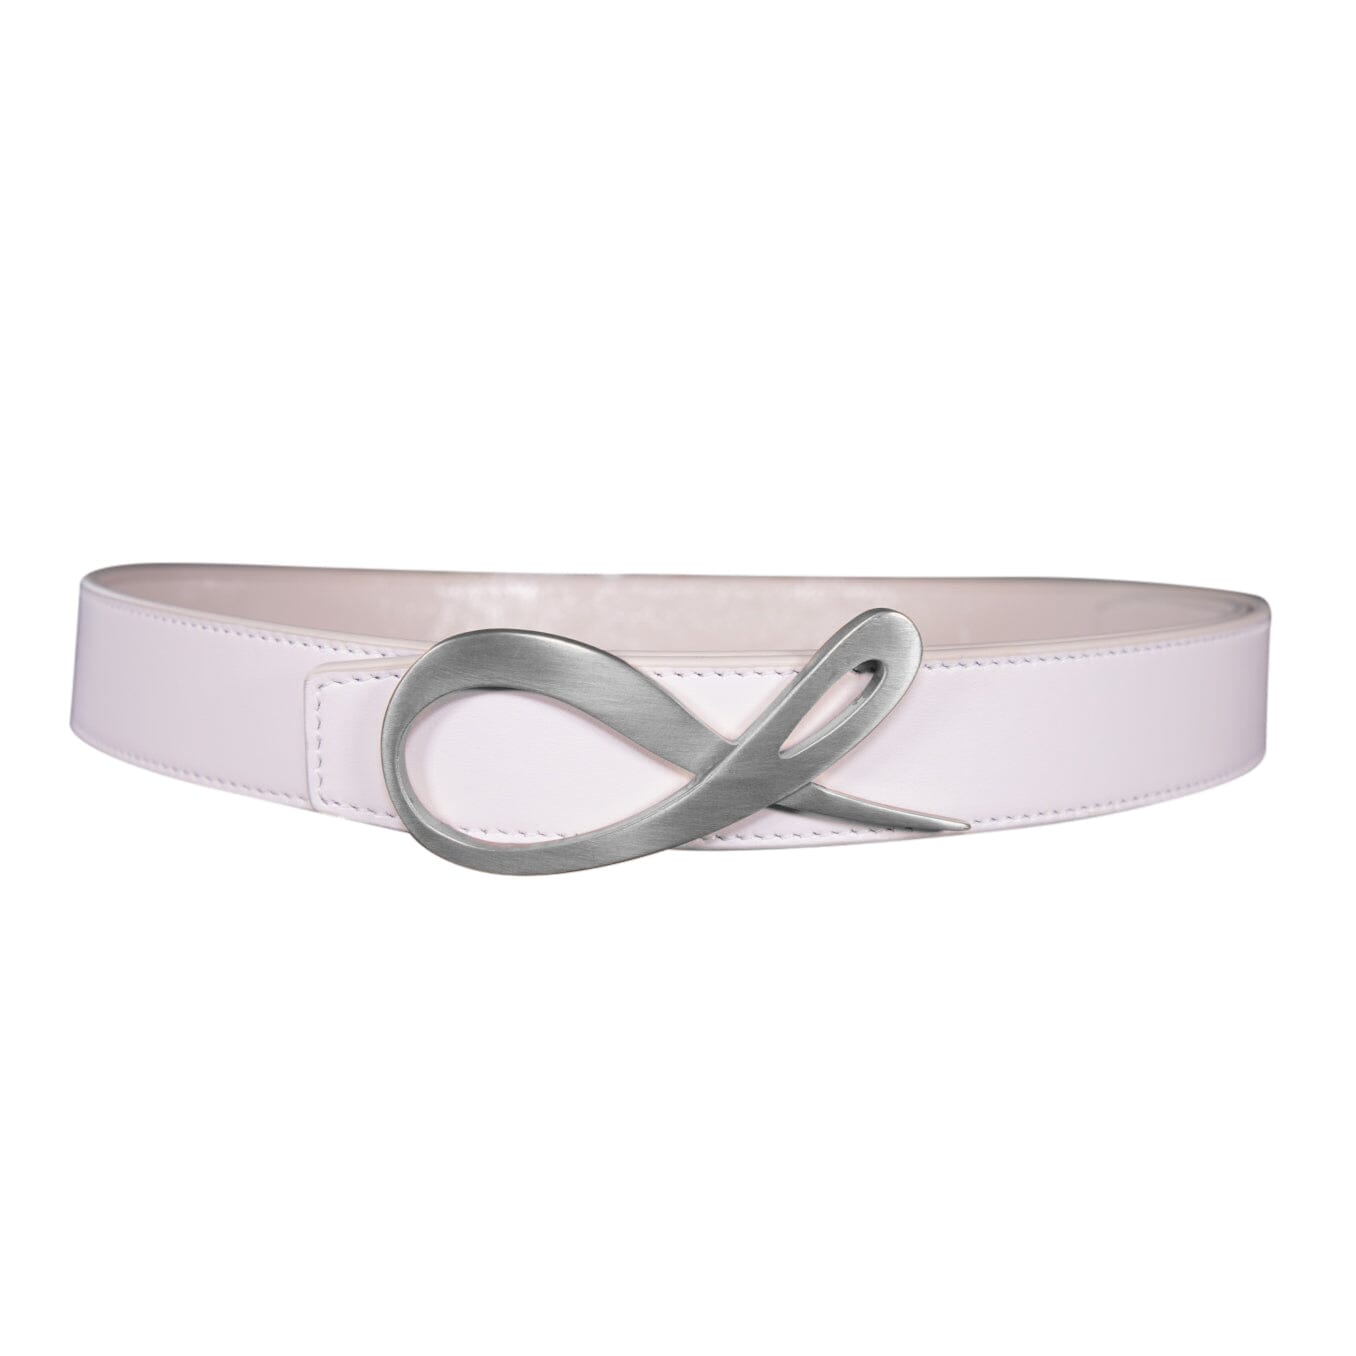 Copy of Cocco Chiffon Reversible Belt With Silver Signature Hardware